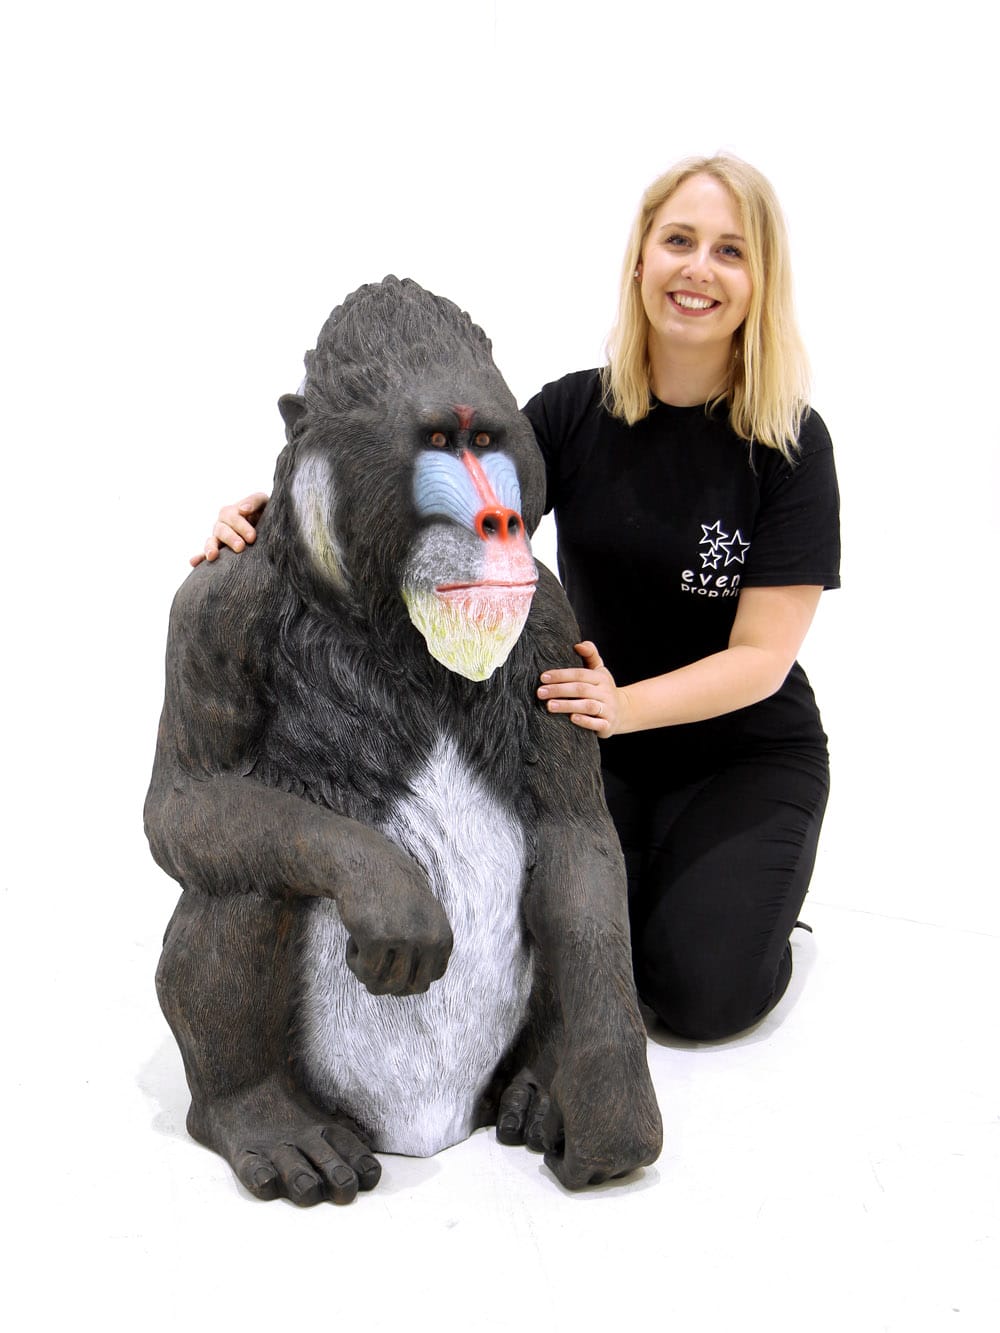 Life Size Mandrill Monkey Event Prop Hire